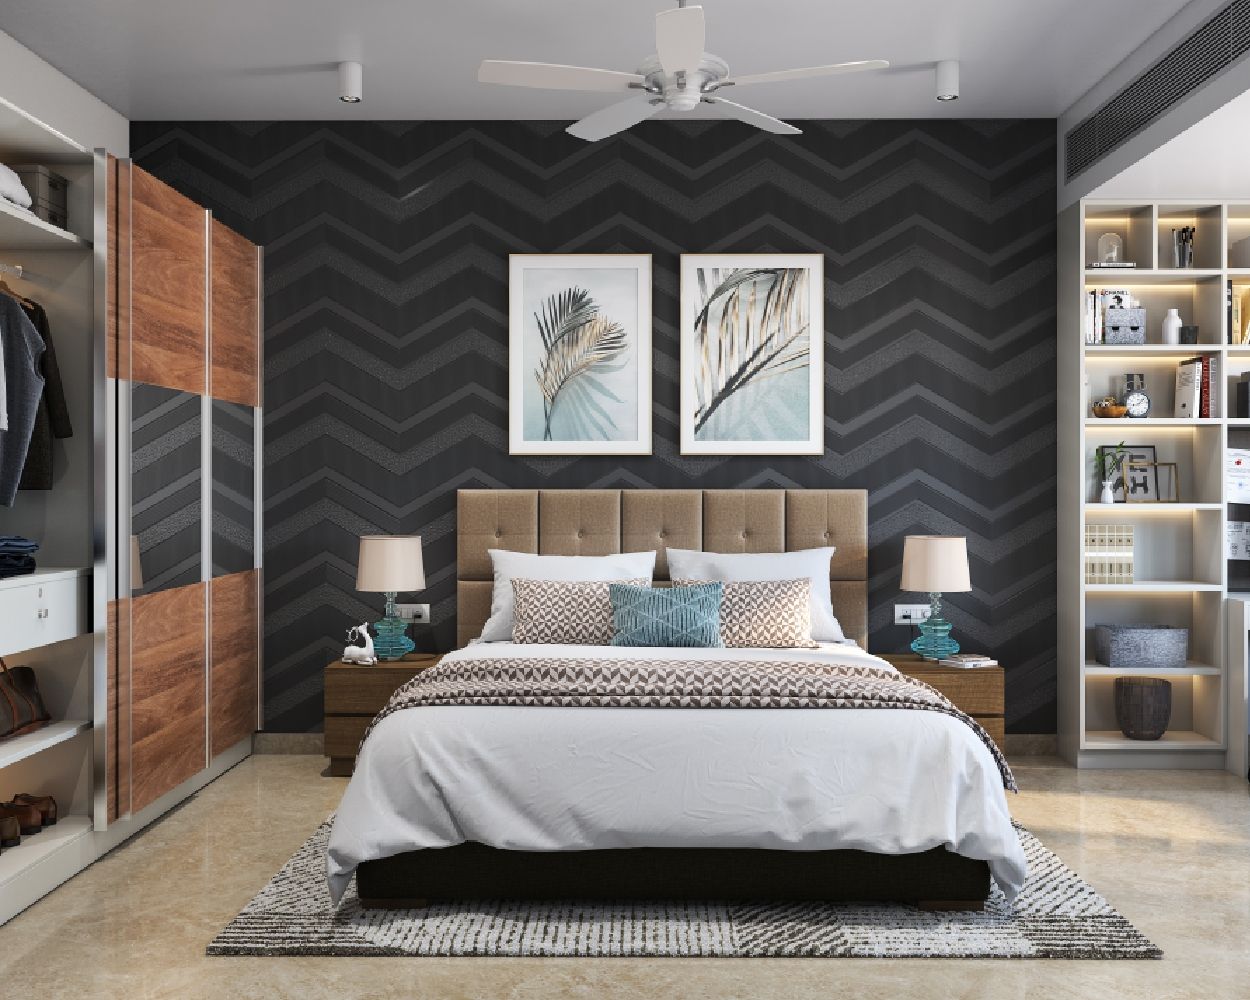 Modern Master Bedroom Design With Grey And Black Chevron Wallpaper